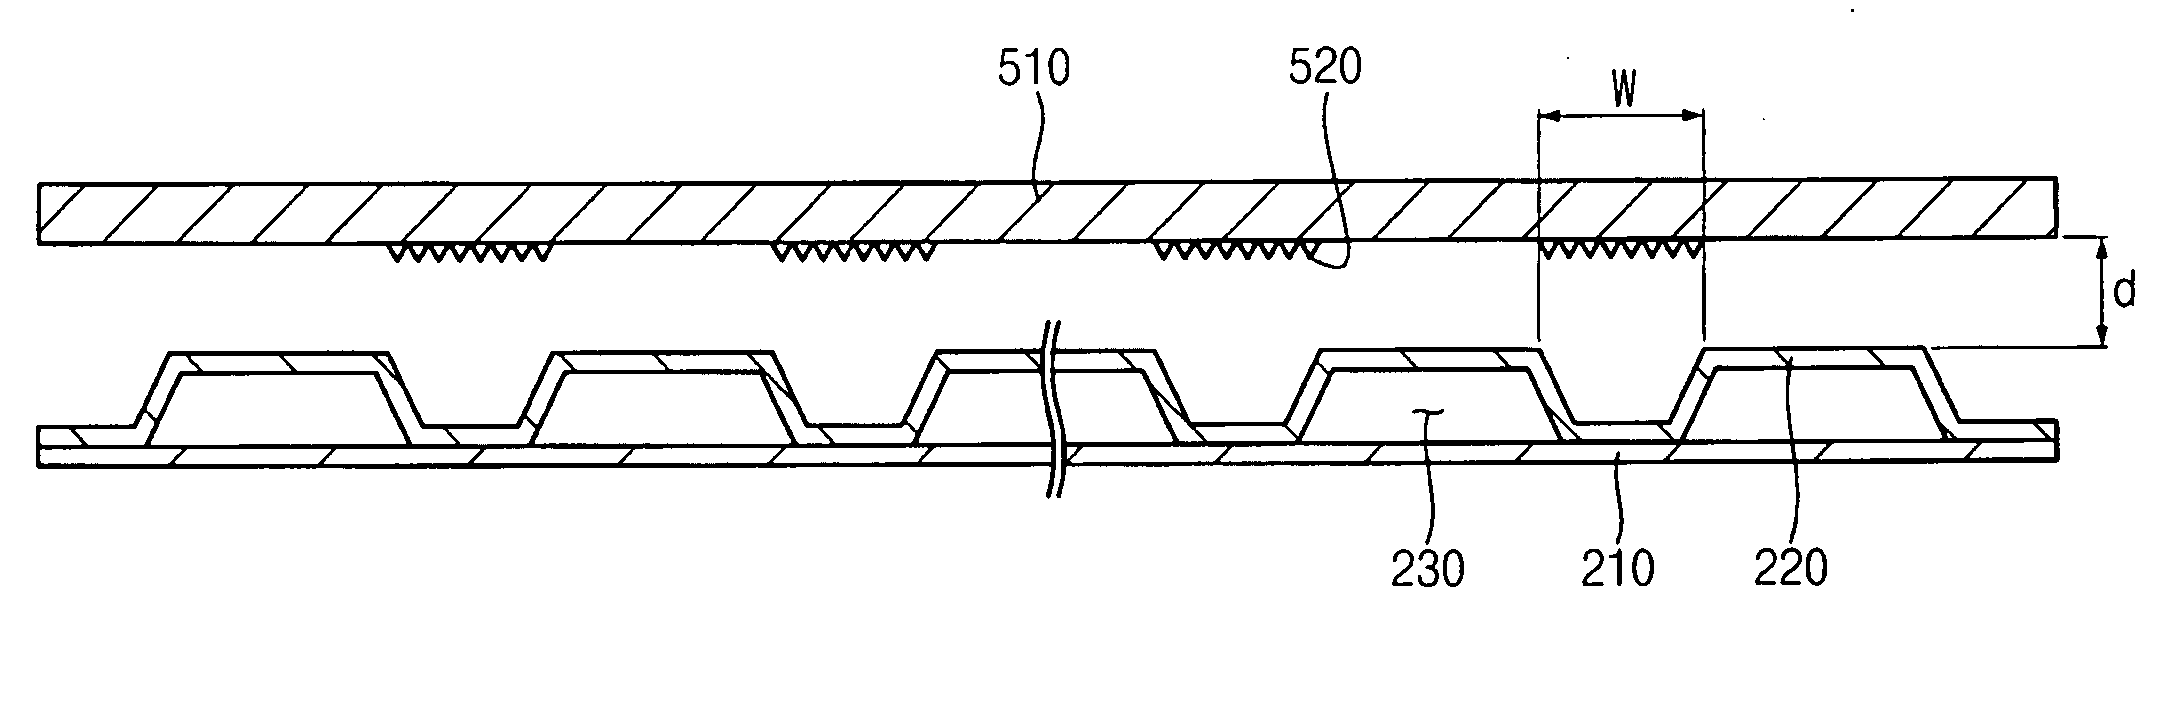 Backlight assembly, method of manufacturing the same and liquid crystal display apparatus having the same